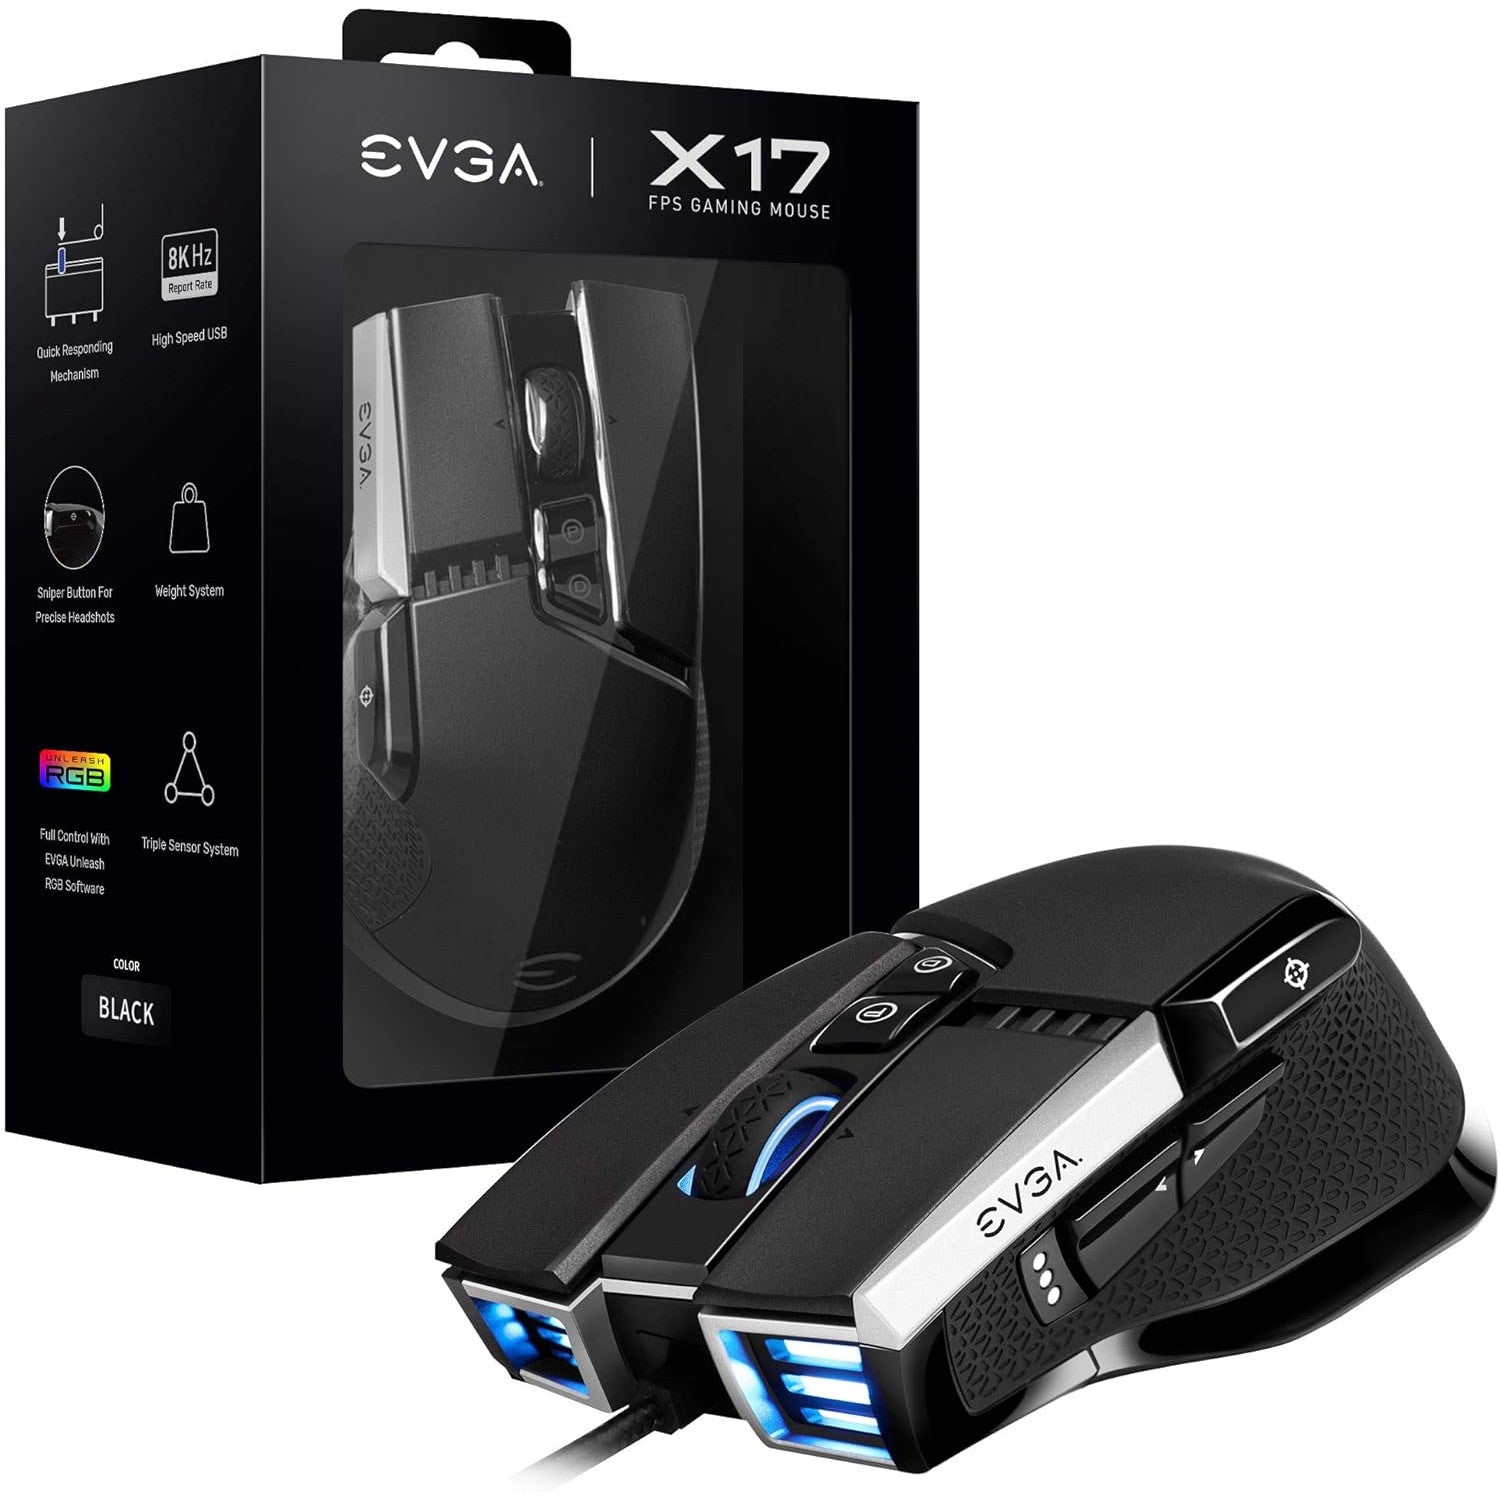 EVGA X17 FPS Wired Gaming Mouse - Black